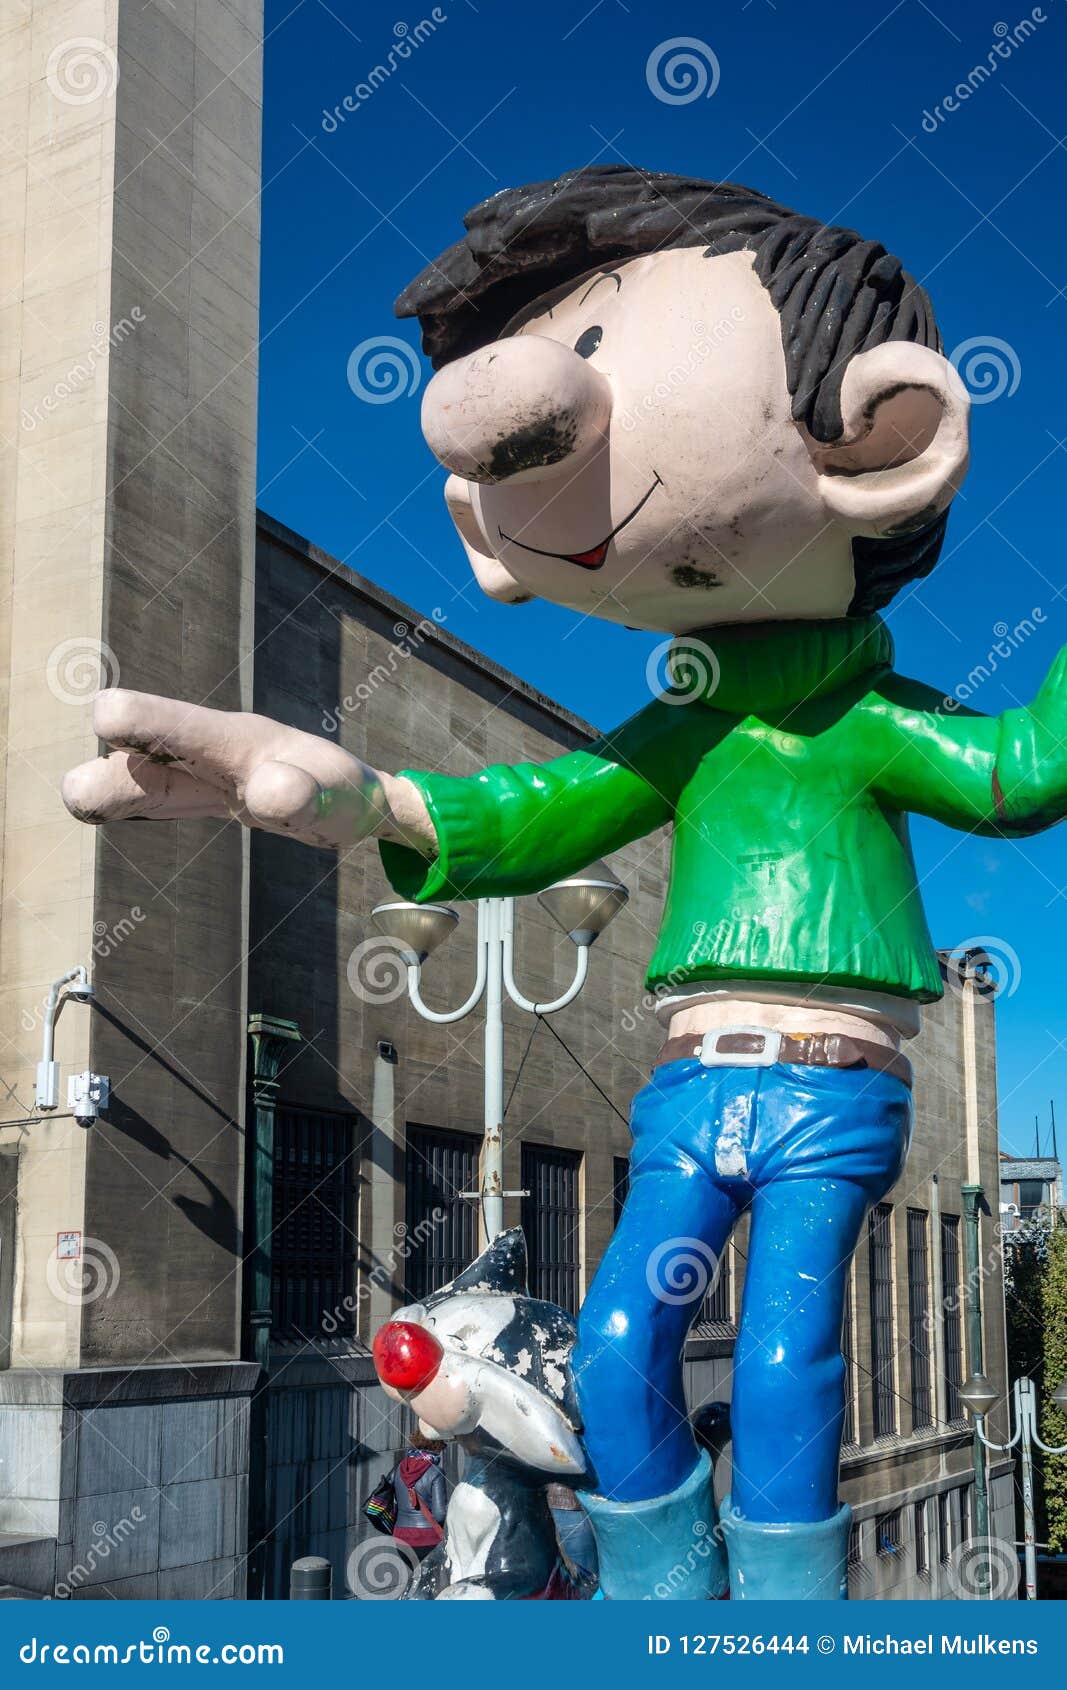 Gaston Lagaffe Photos Free Royalty Free Stock Photos From Dreamstime